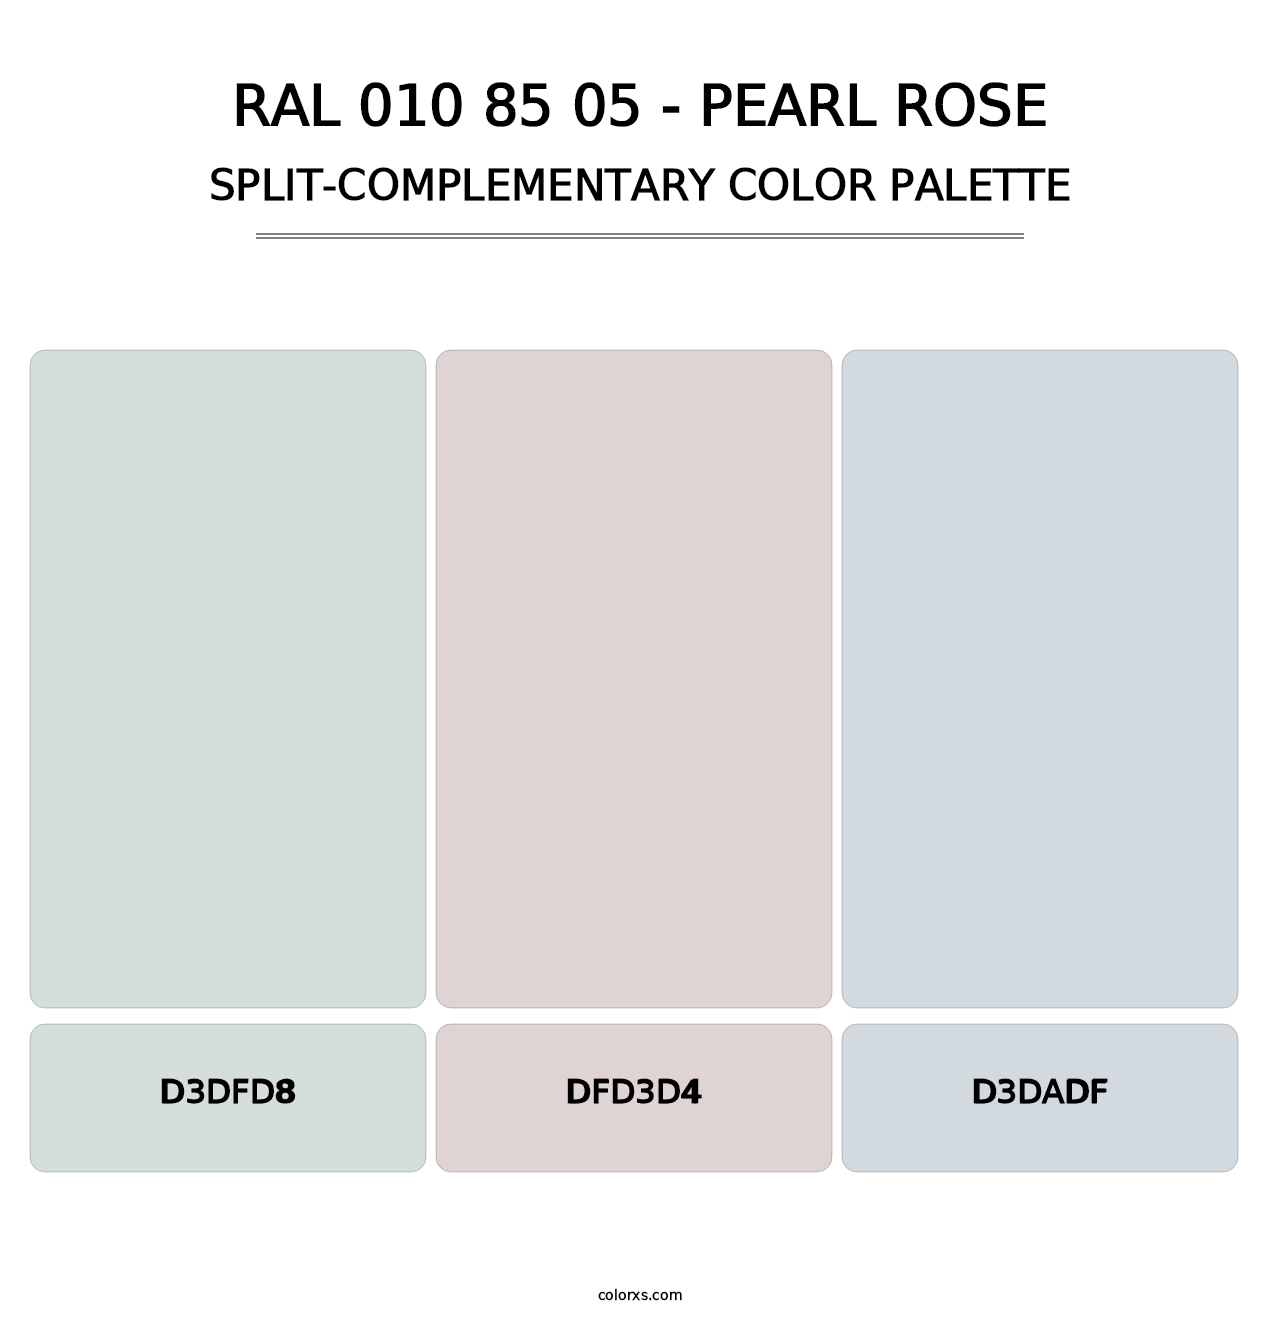 RAL 010 85 05 - Pearl Rose - Split-Complementary Color Palette